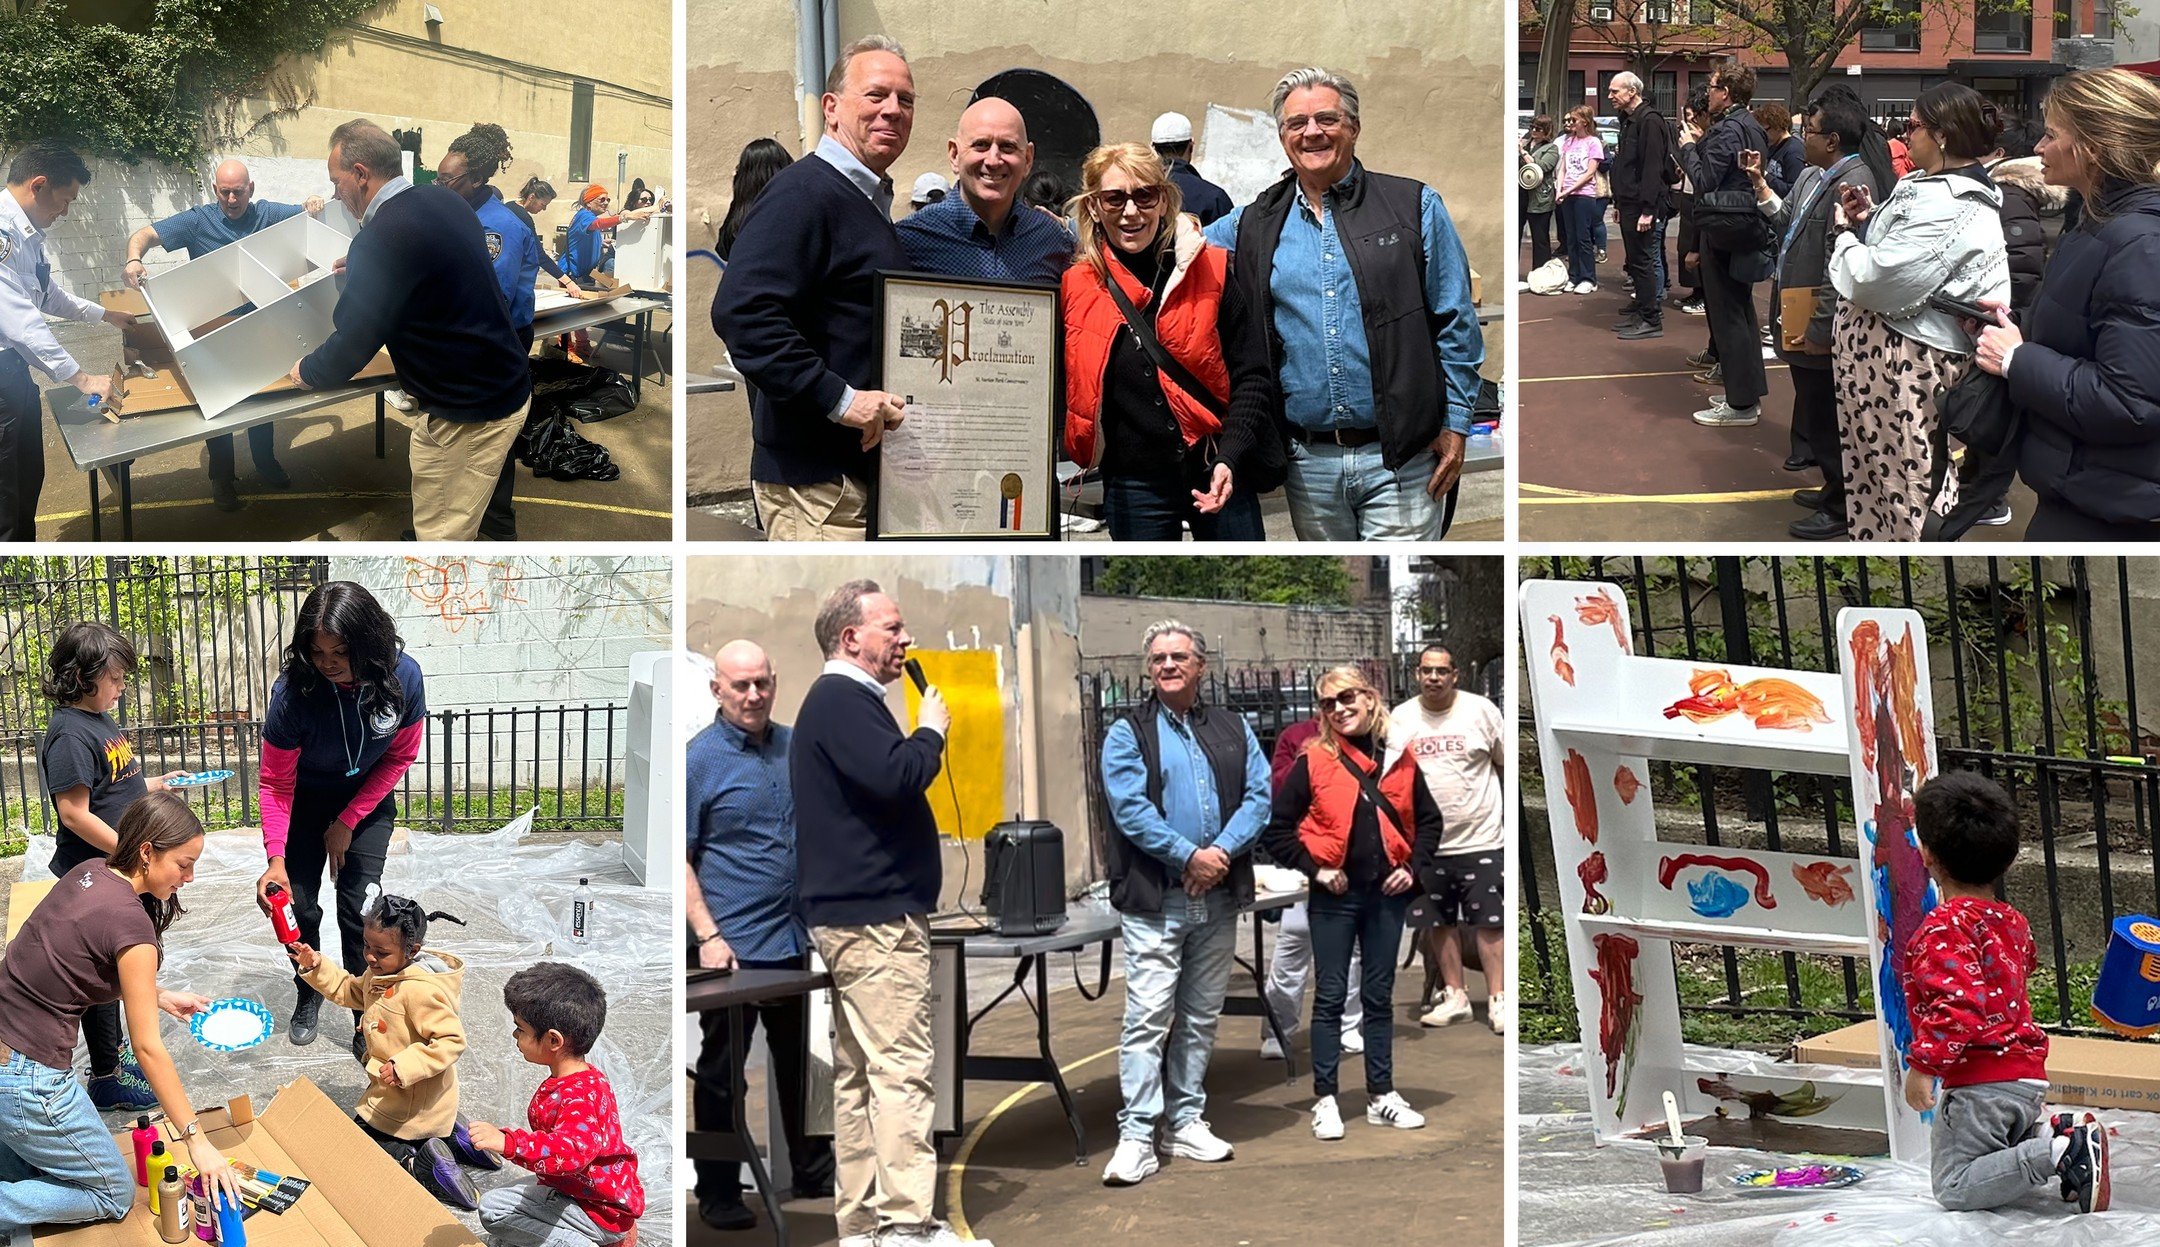 Today at @harveyforny's Day of Service for Earth Month, St. Vartan Park Conservancy was proud to volunteer, helping ready bookshelves for NYCHA tenants&mdash;and to accept (by officers @okevinokeefe, @michaelannrowe and @cbb311) a state proclamation 